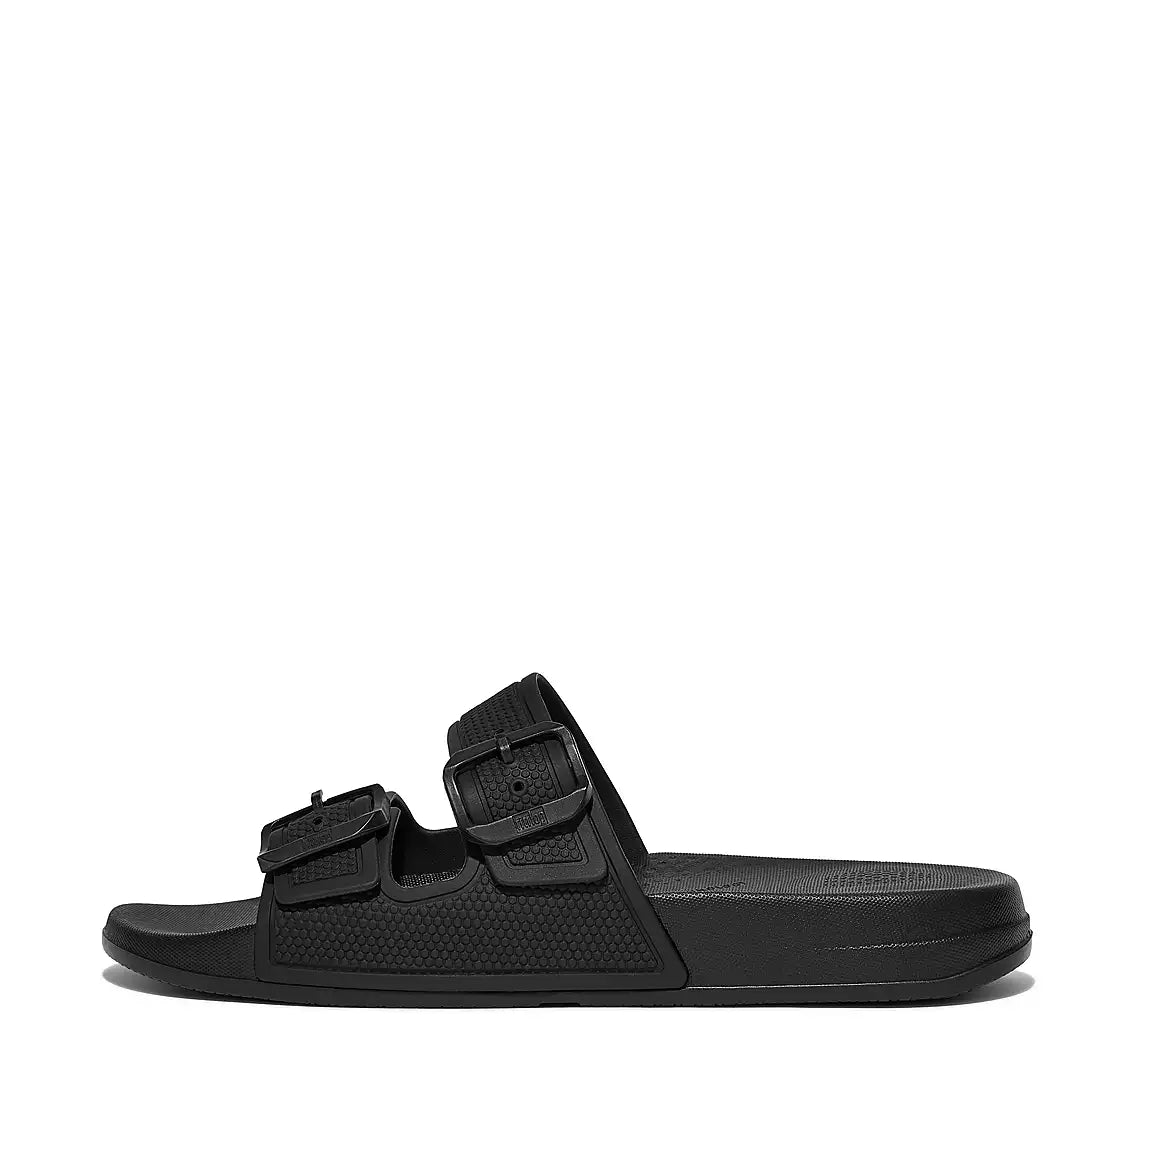 Fitflop Women’s Iquishon Two-Bar Buckle Slides Black